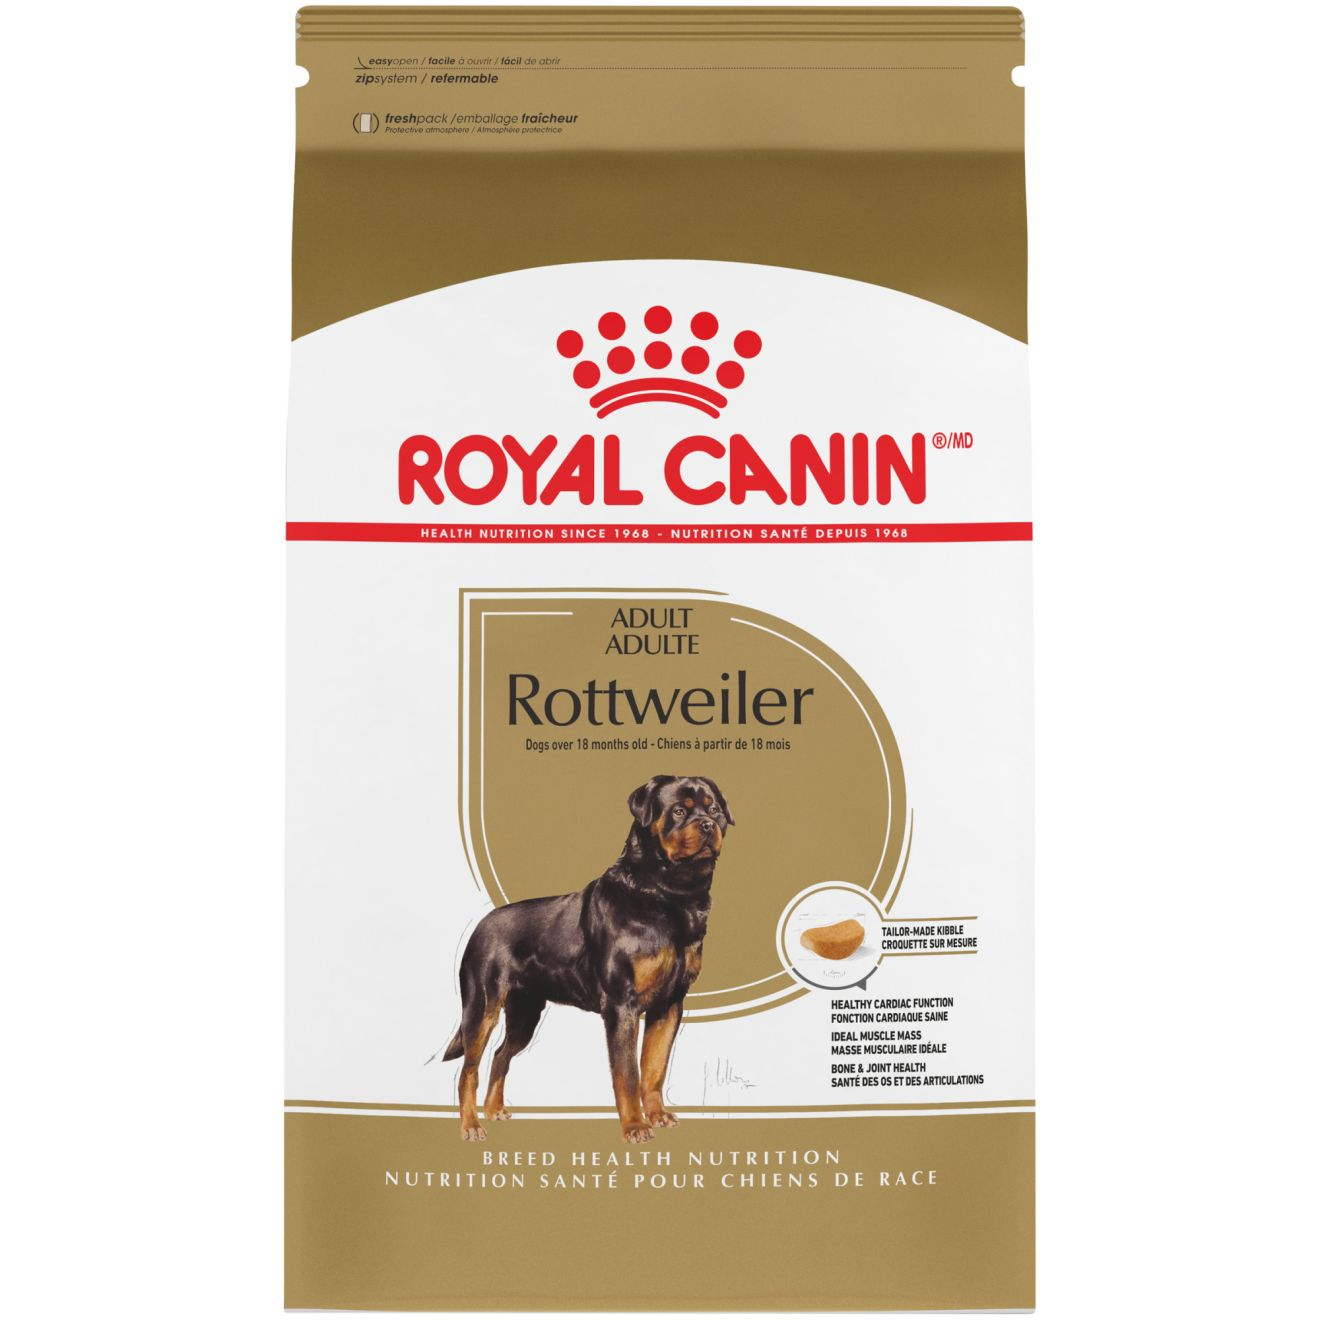 what is the best food for rottweiler?